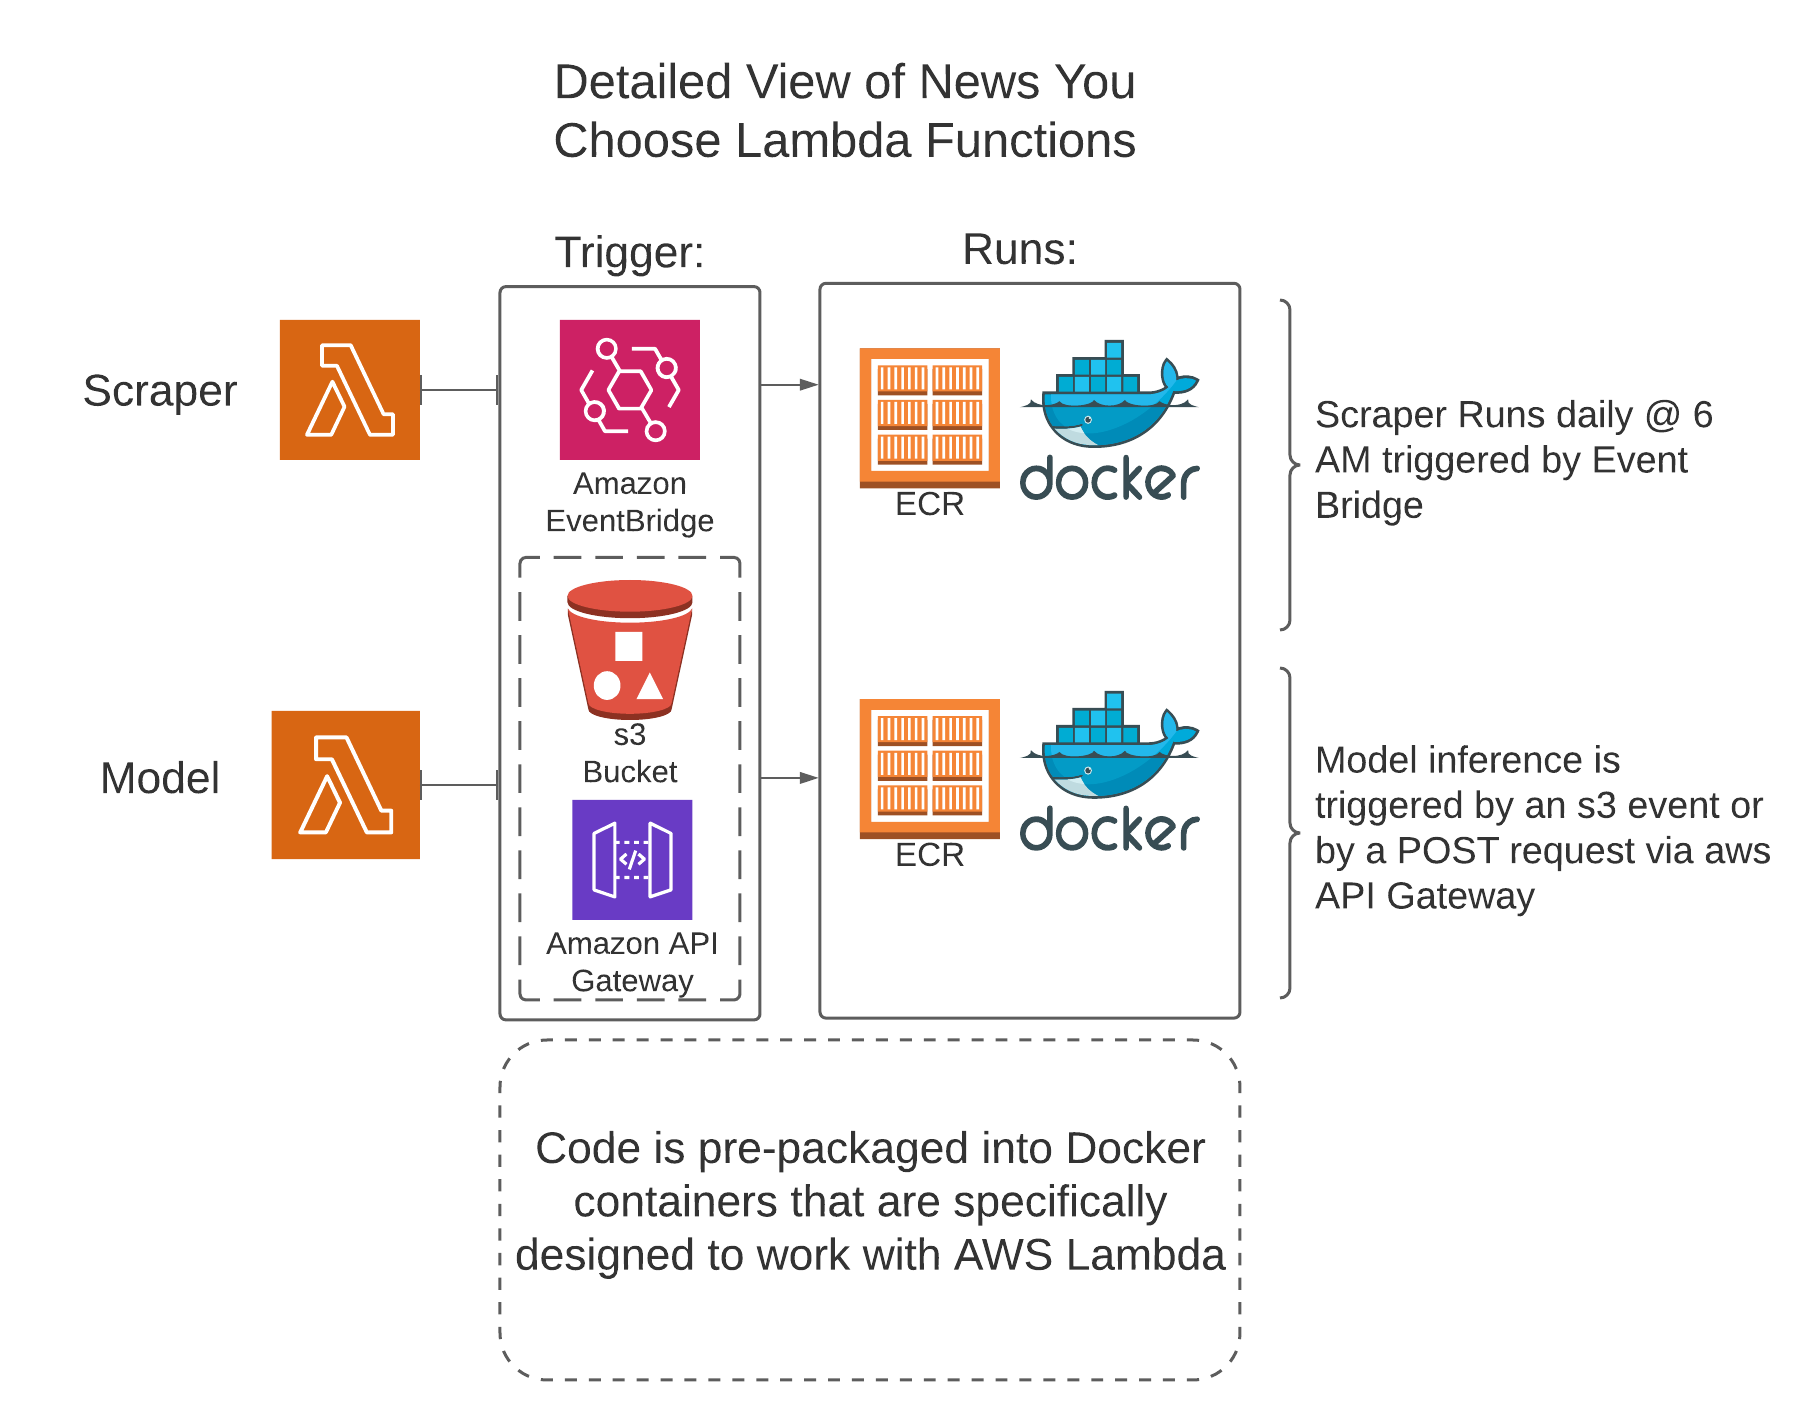 Overview of News You Choose Lambda